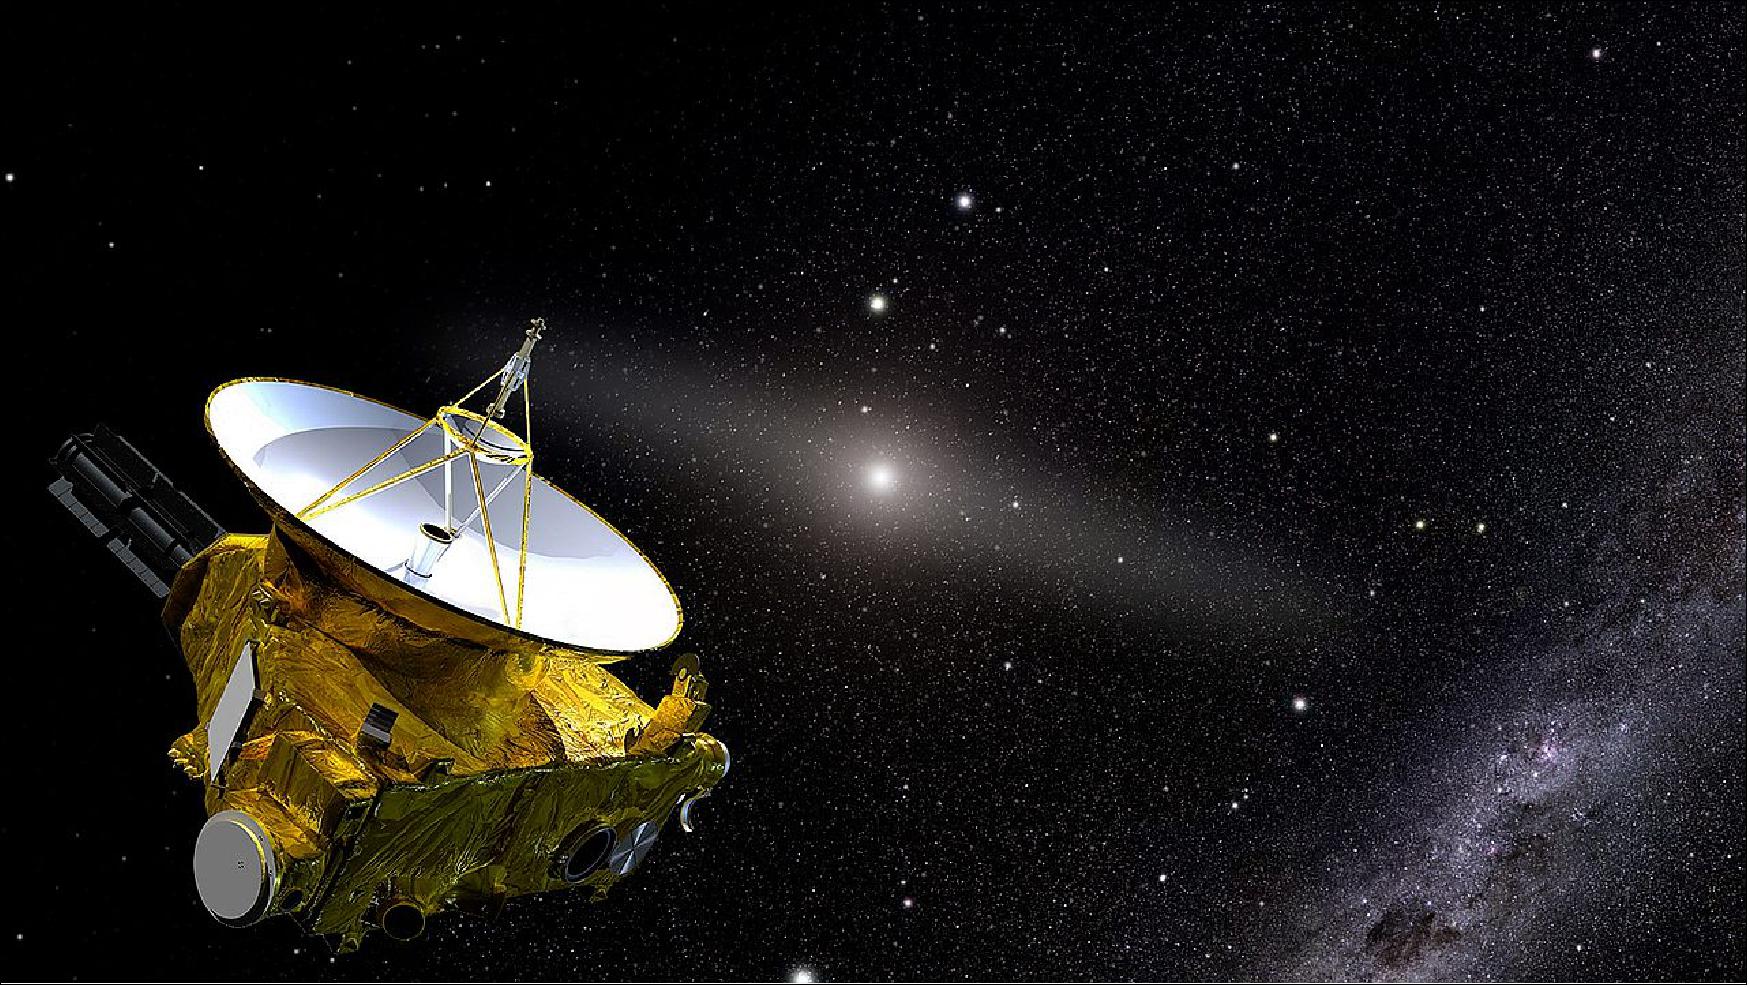 Figure 22: This artist’s illustration shows NASA’s New Horizons spacecraft in the outer solar system. In the background lies the Sun and a glowing band representing zodiacal light, caused by sunlight reflecting off of dust. By traveling beyond the inner solar system and its accompanying light pollution, New Horizons was able to answer the question: How dark is space? At lower right are background stars of the Milky Way (image credit: STScI, Joe Olmsted)